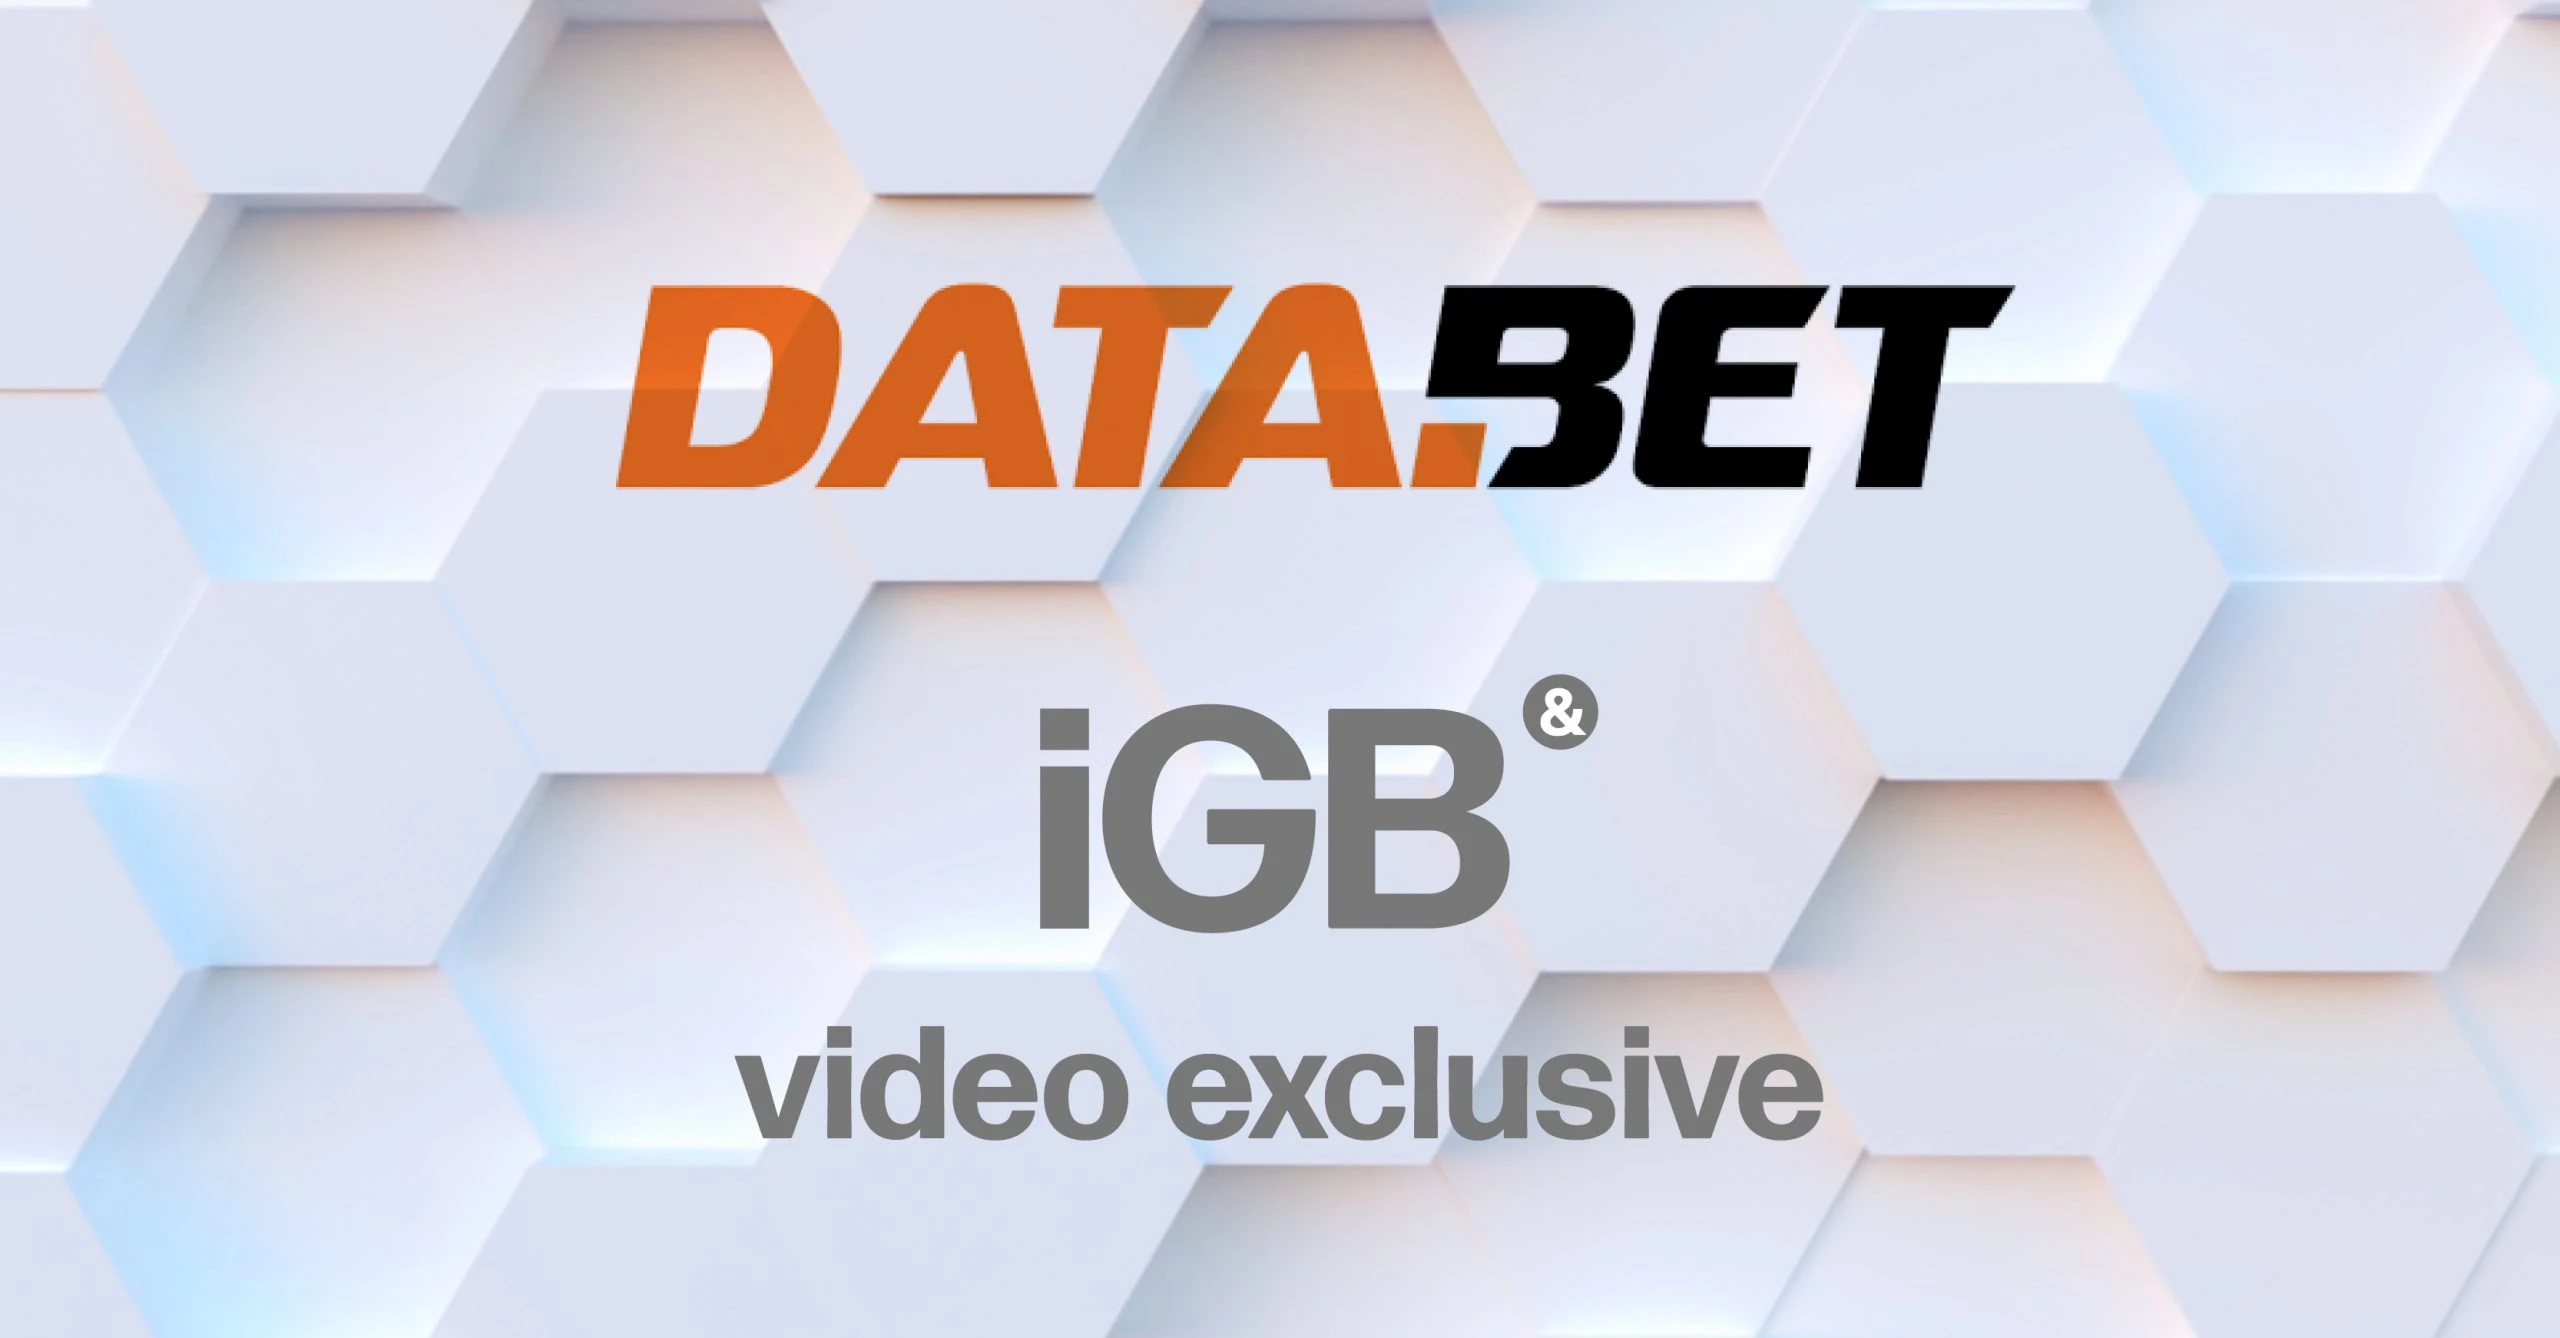 DATA.BET aims to demystify esports data